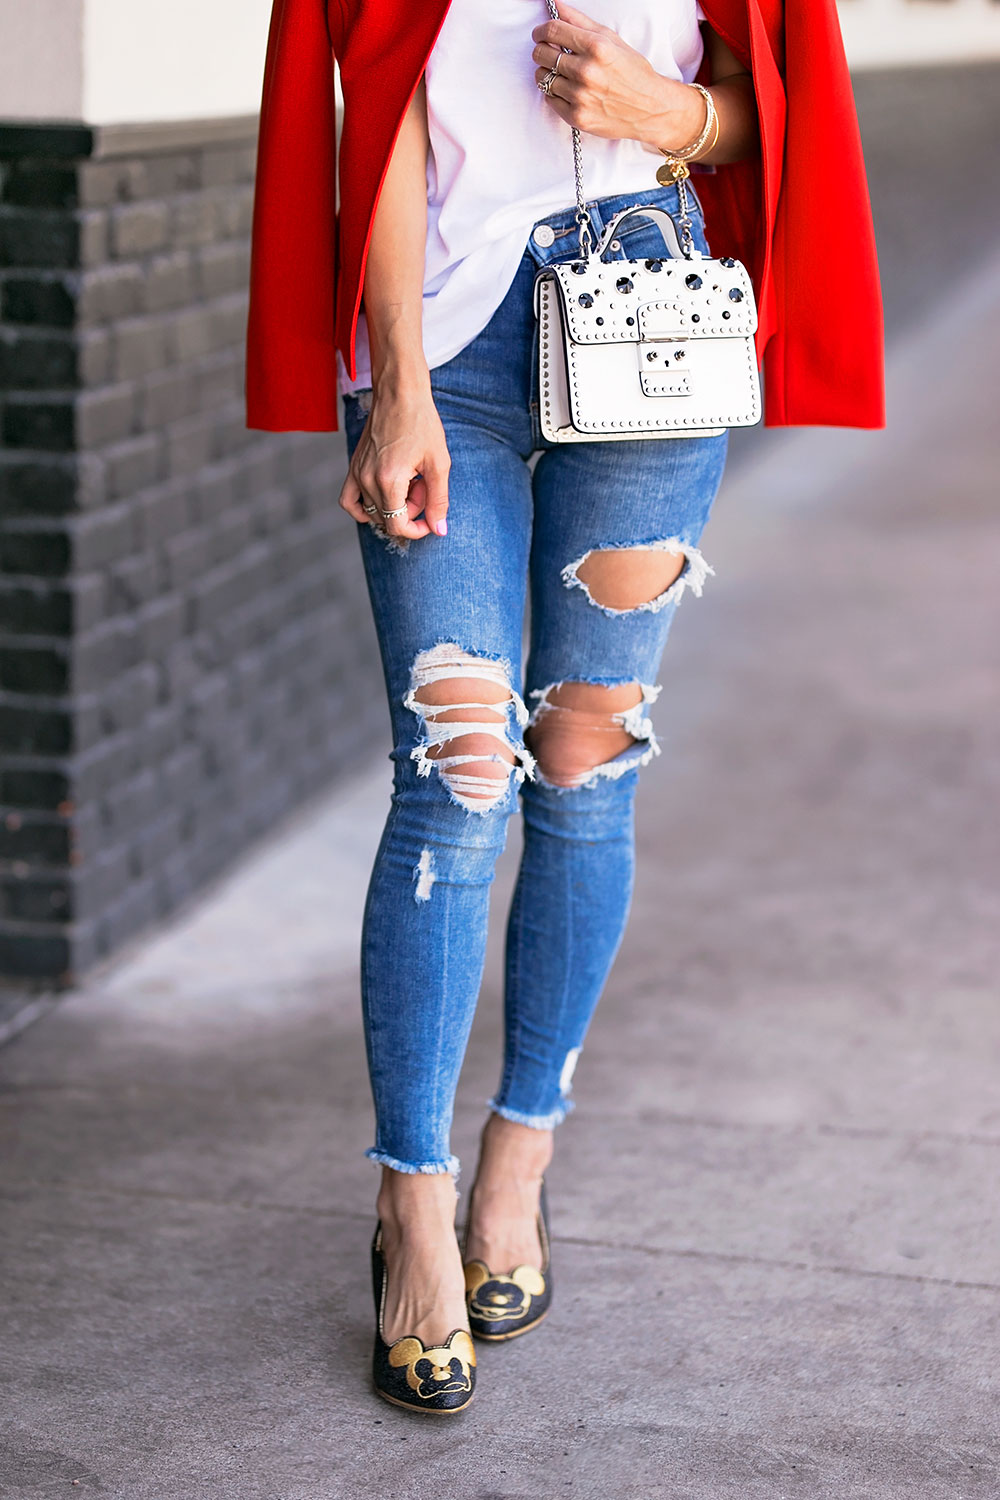 red blazer with jeans